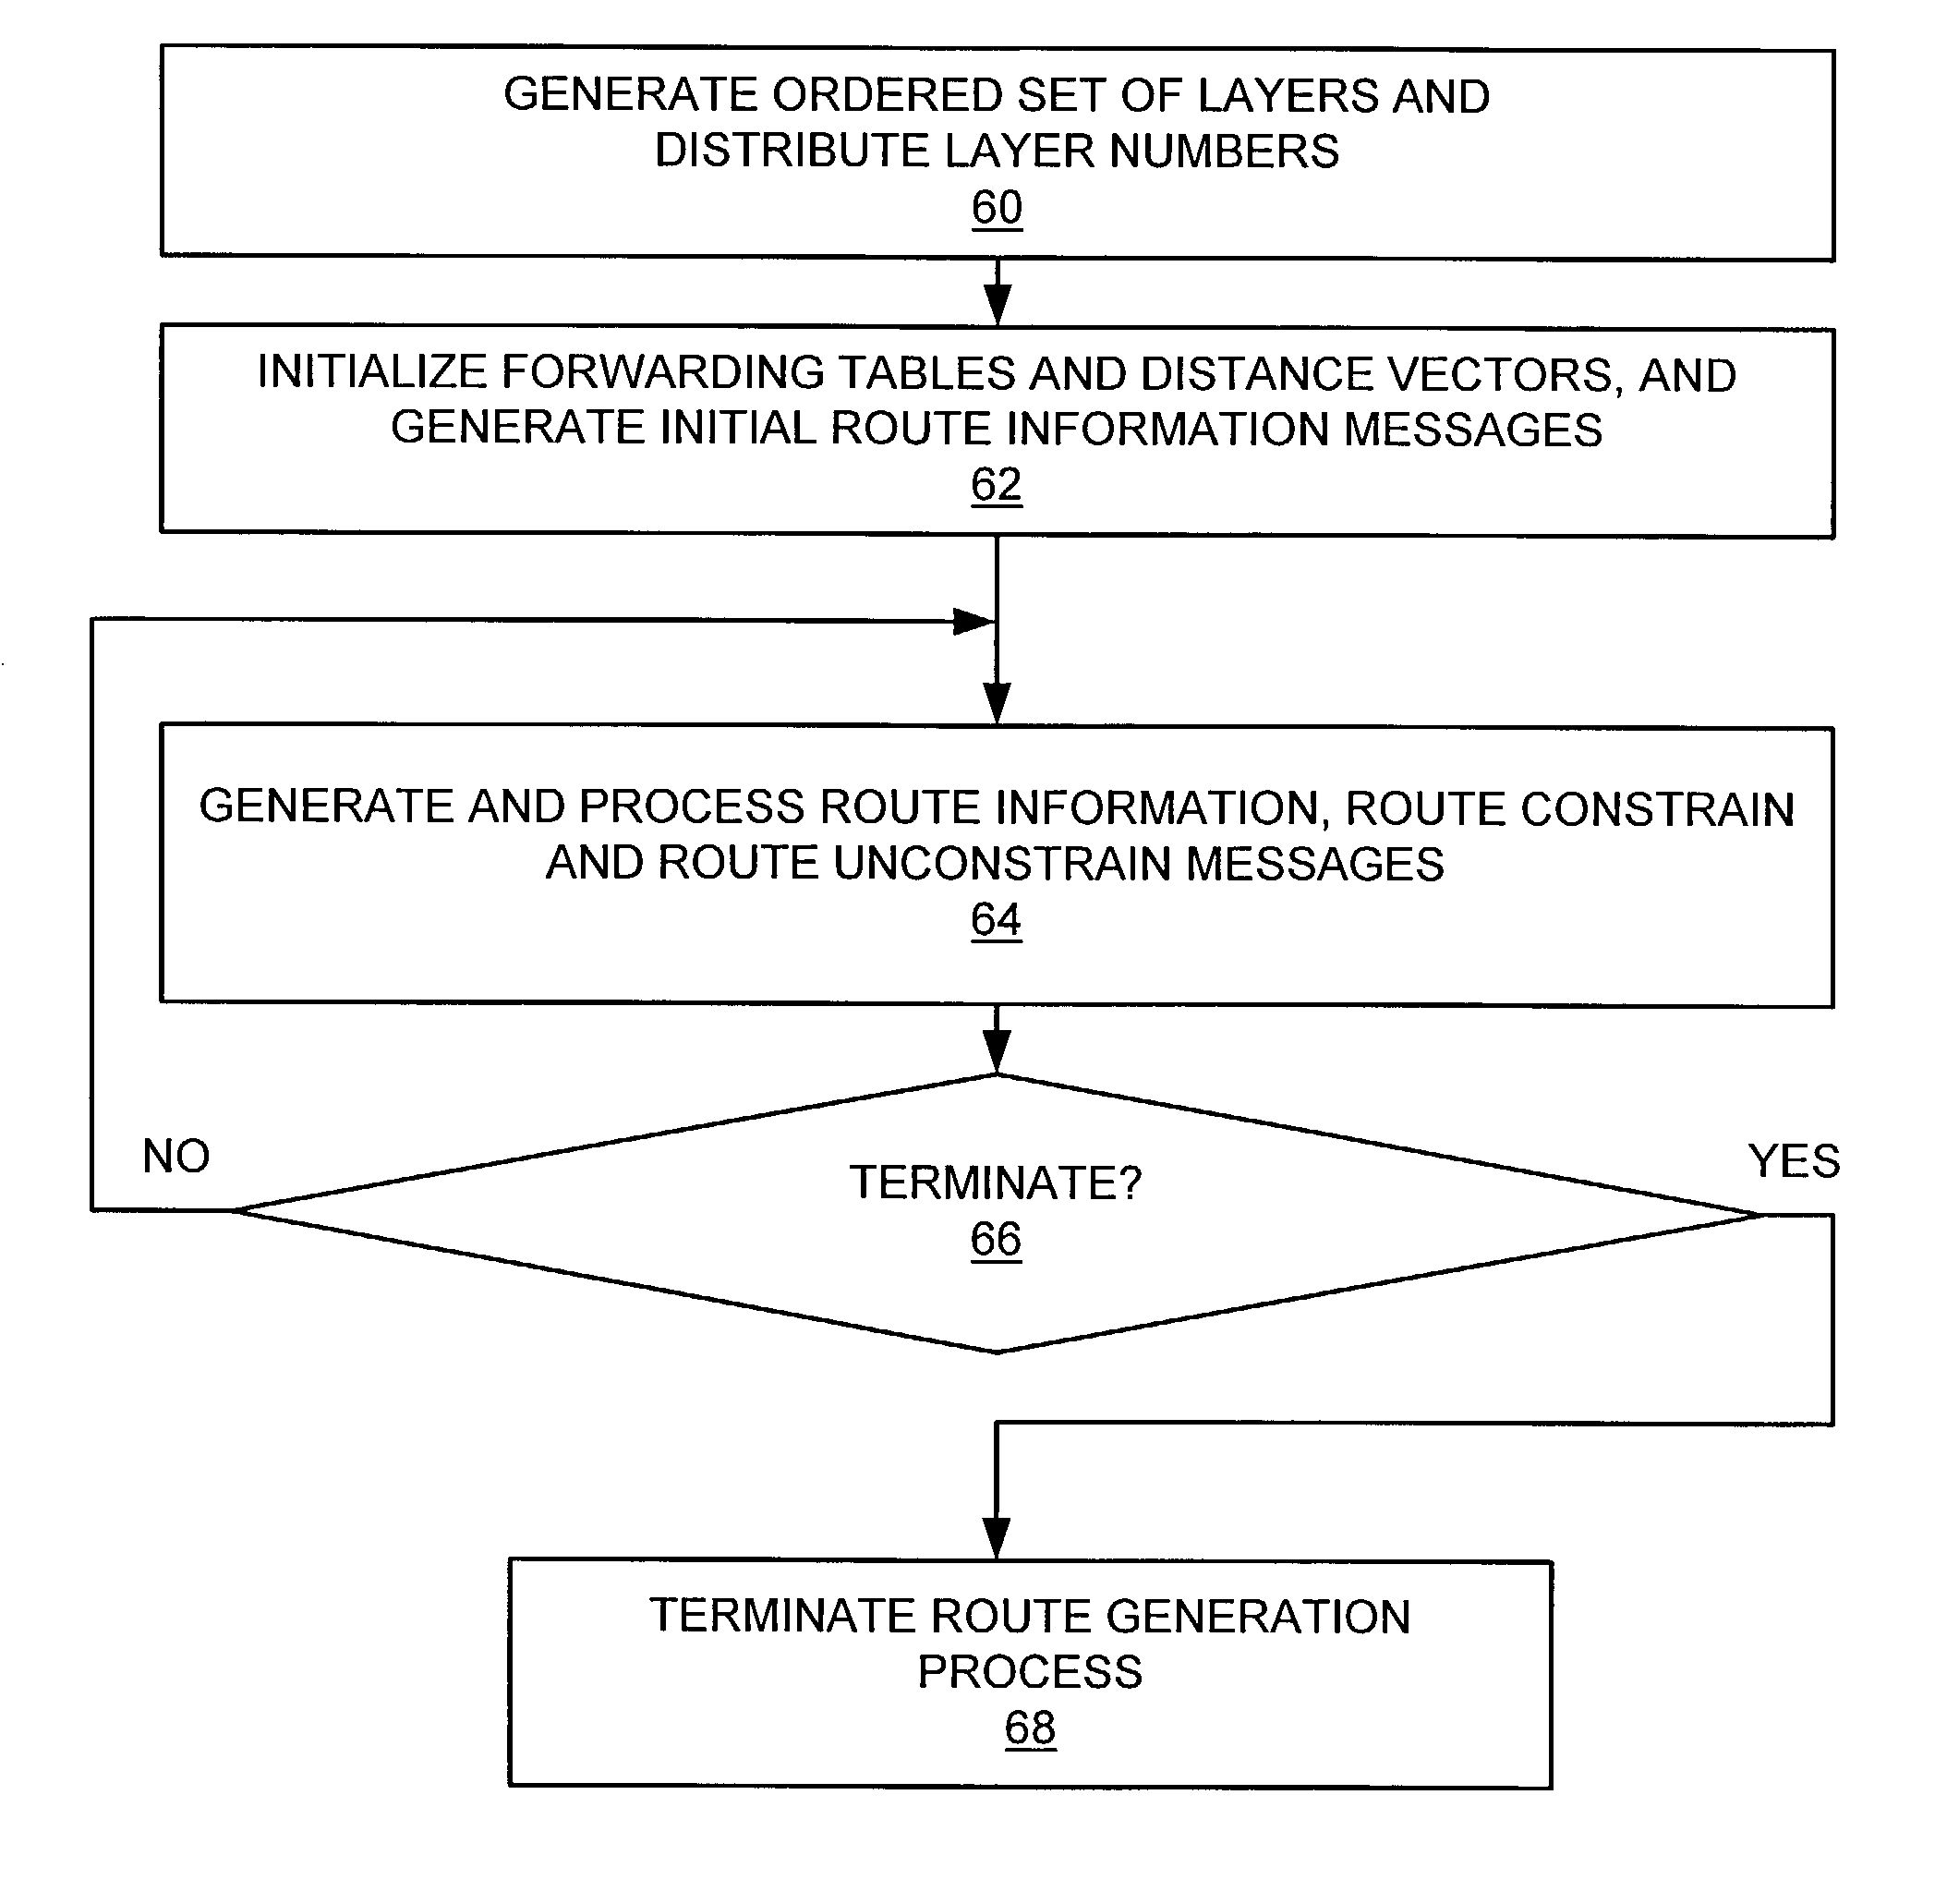 Calculation of layered routes in a distributed manner